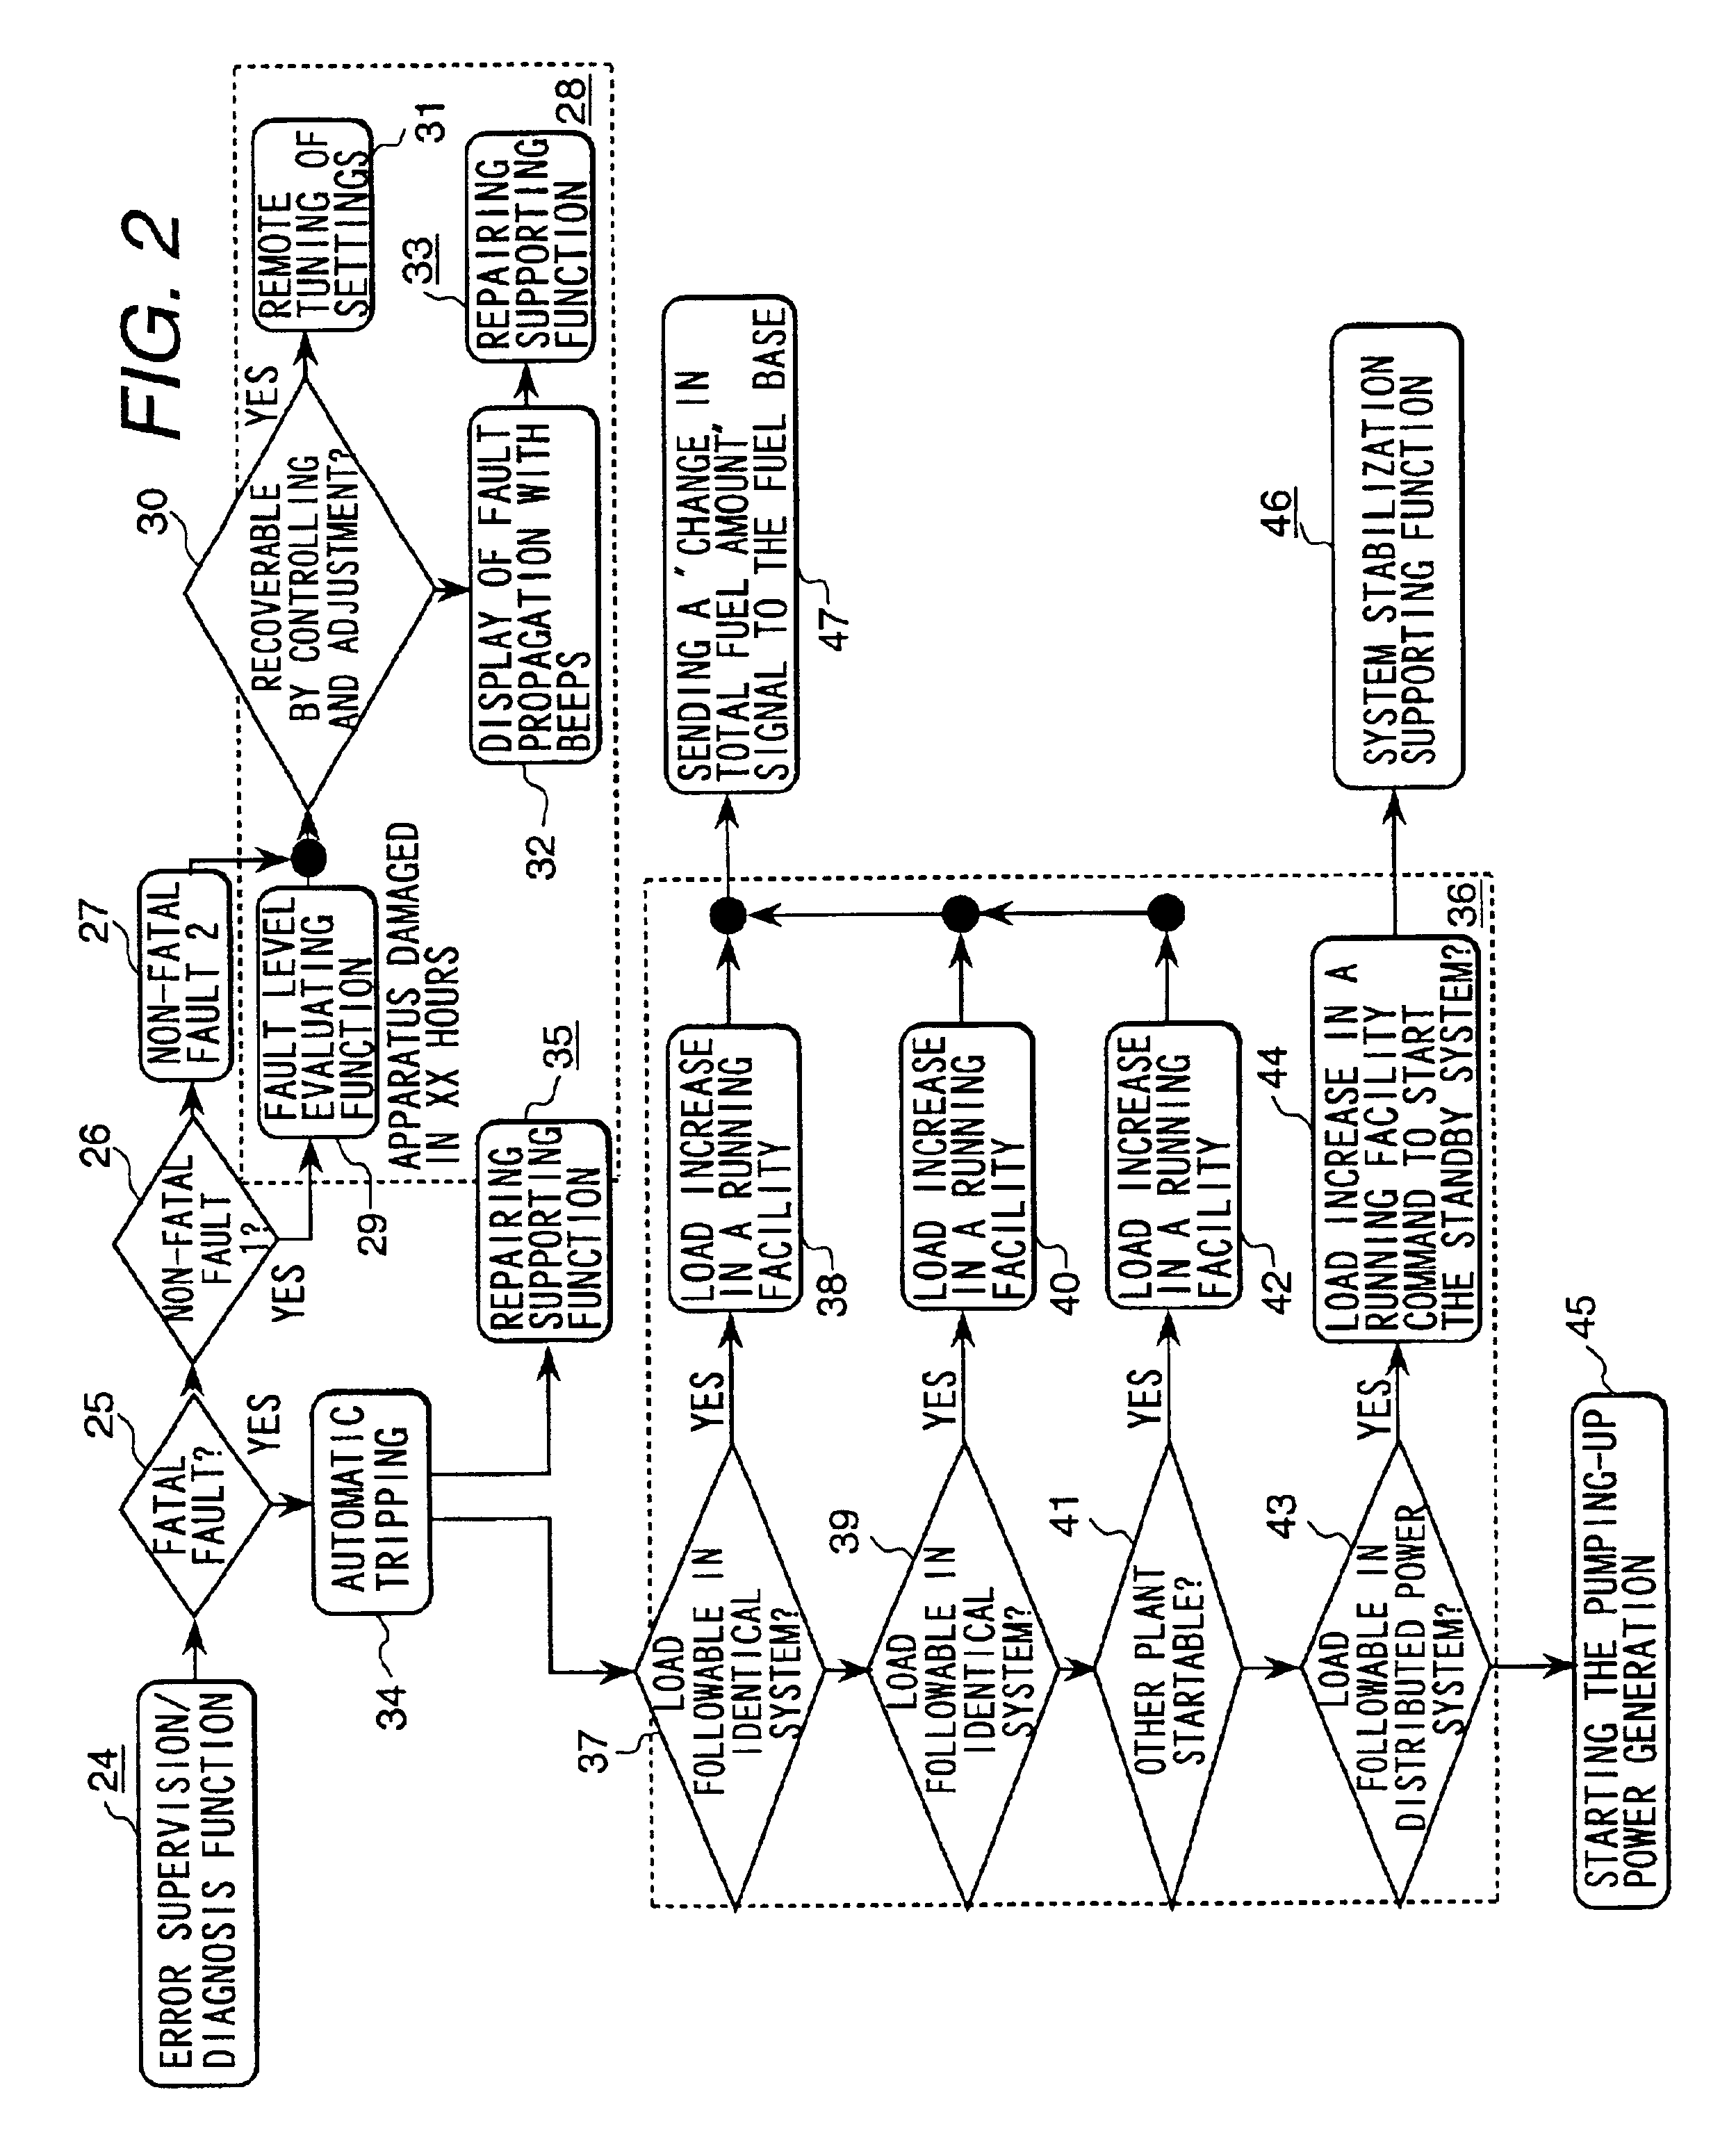 Power plant operation control system and a power plant maintaining and managing method